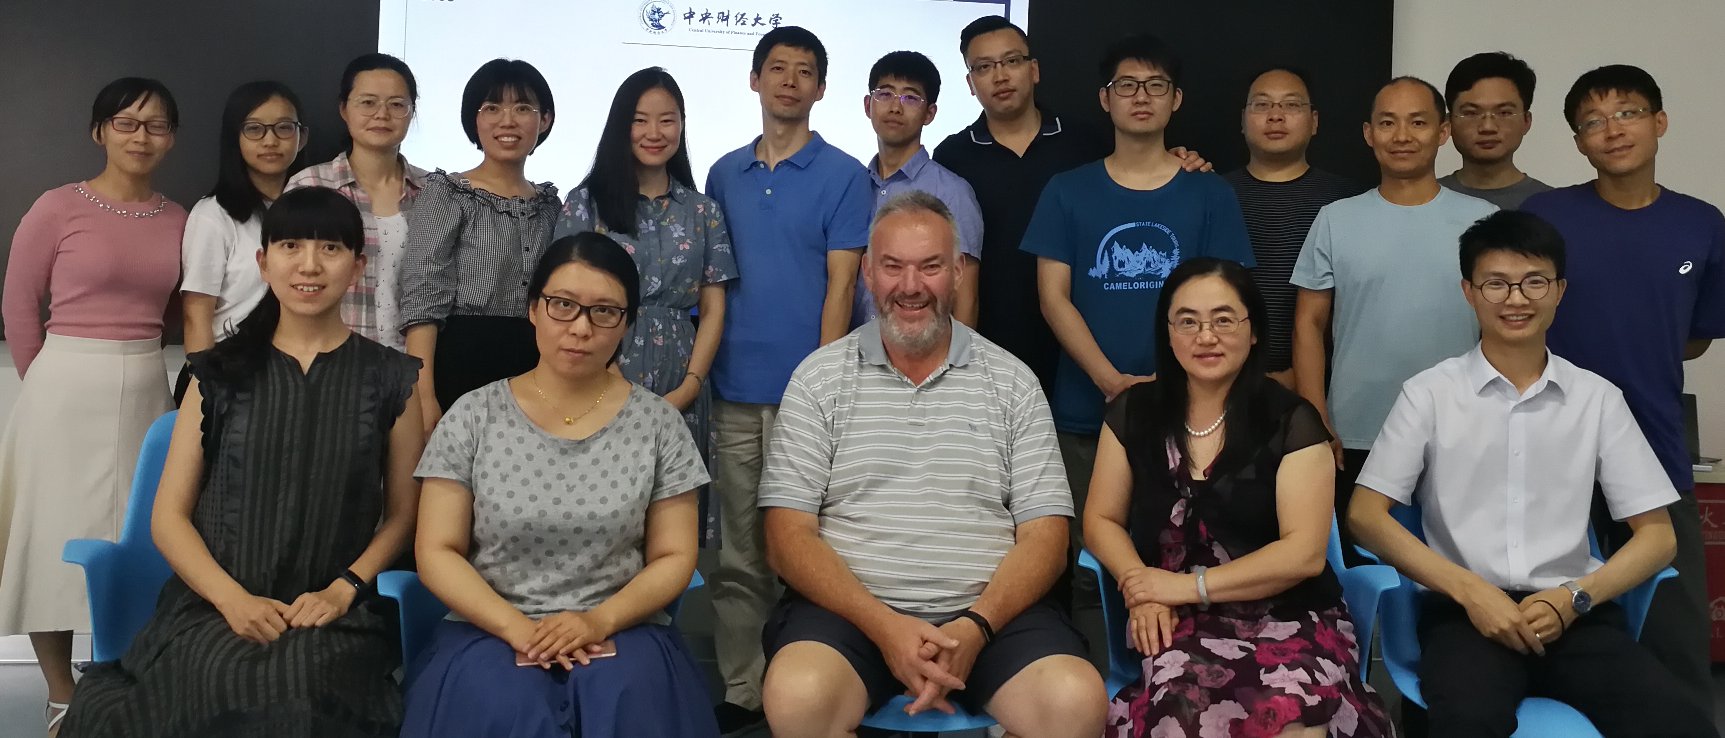 July 2019 CGE course held at Central University of Finance and Economics, Beijing